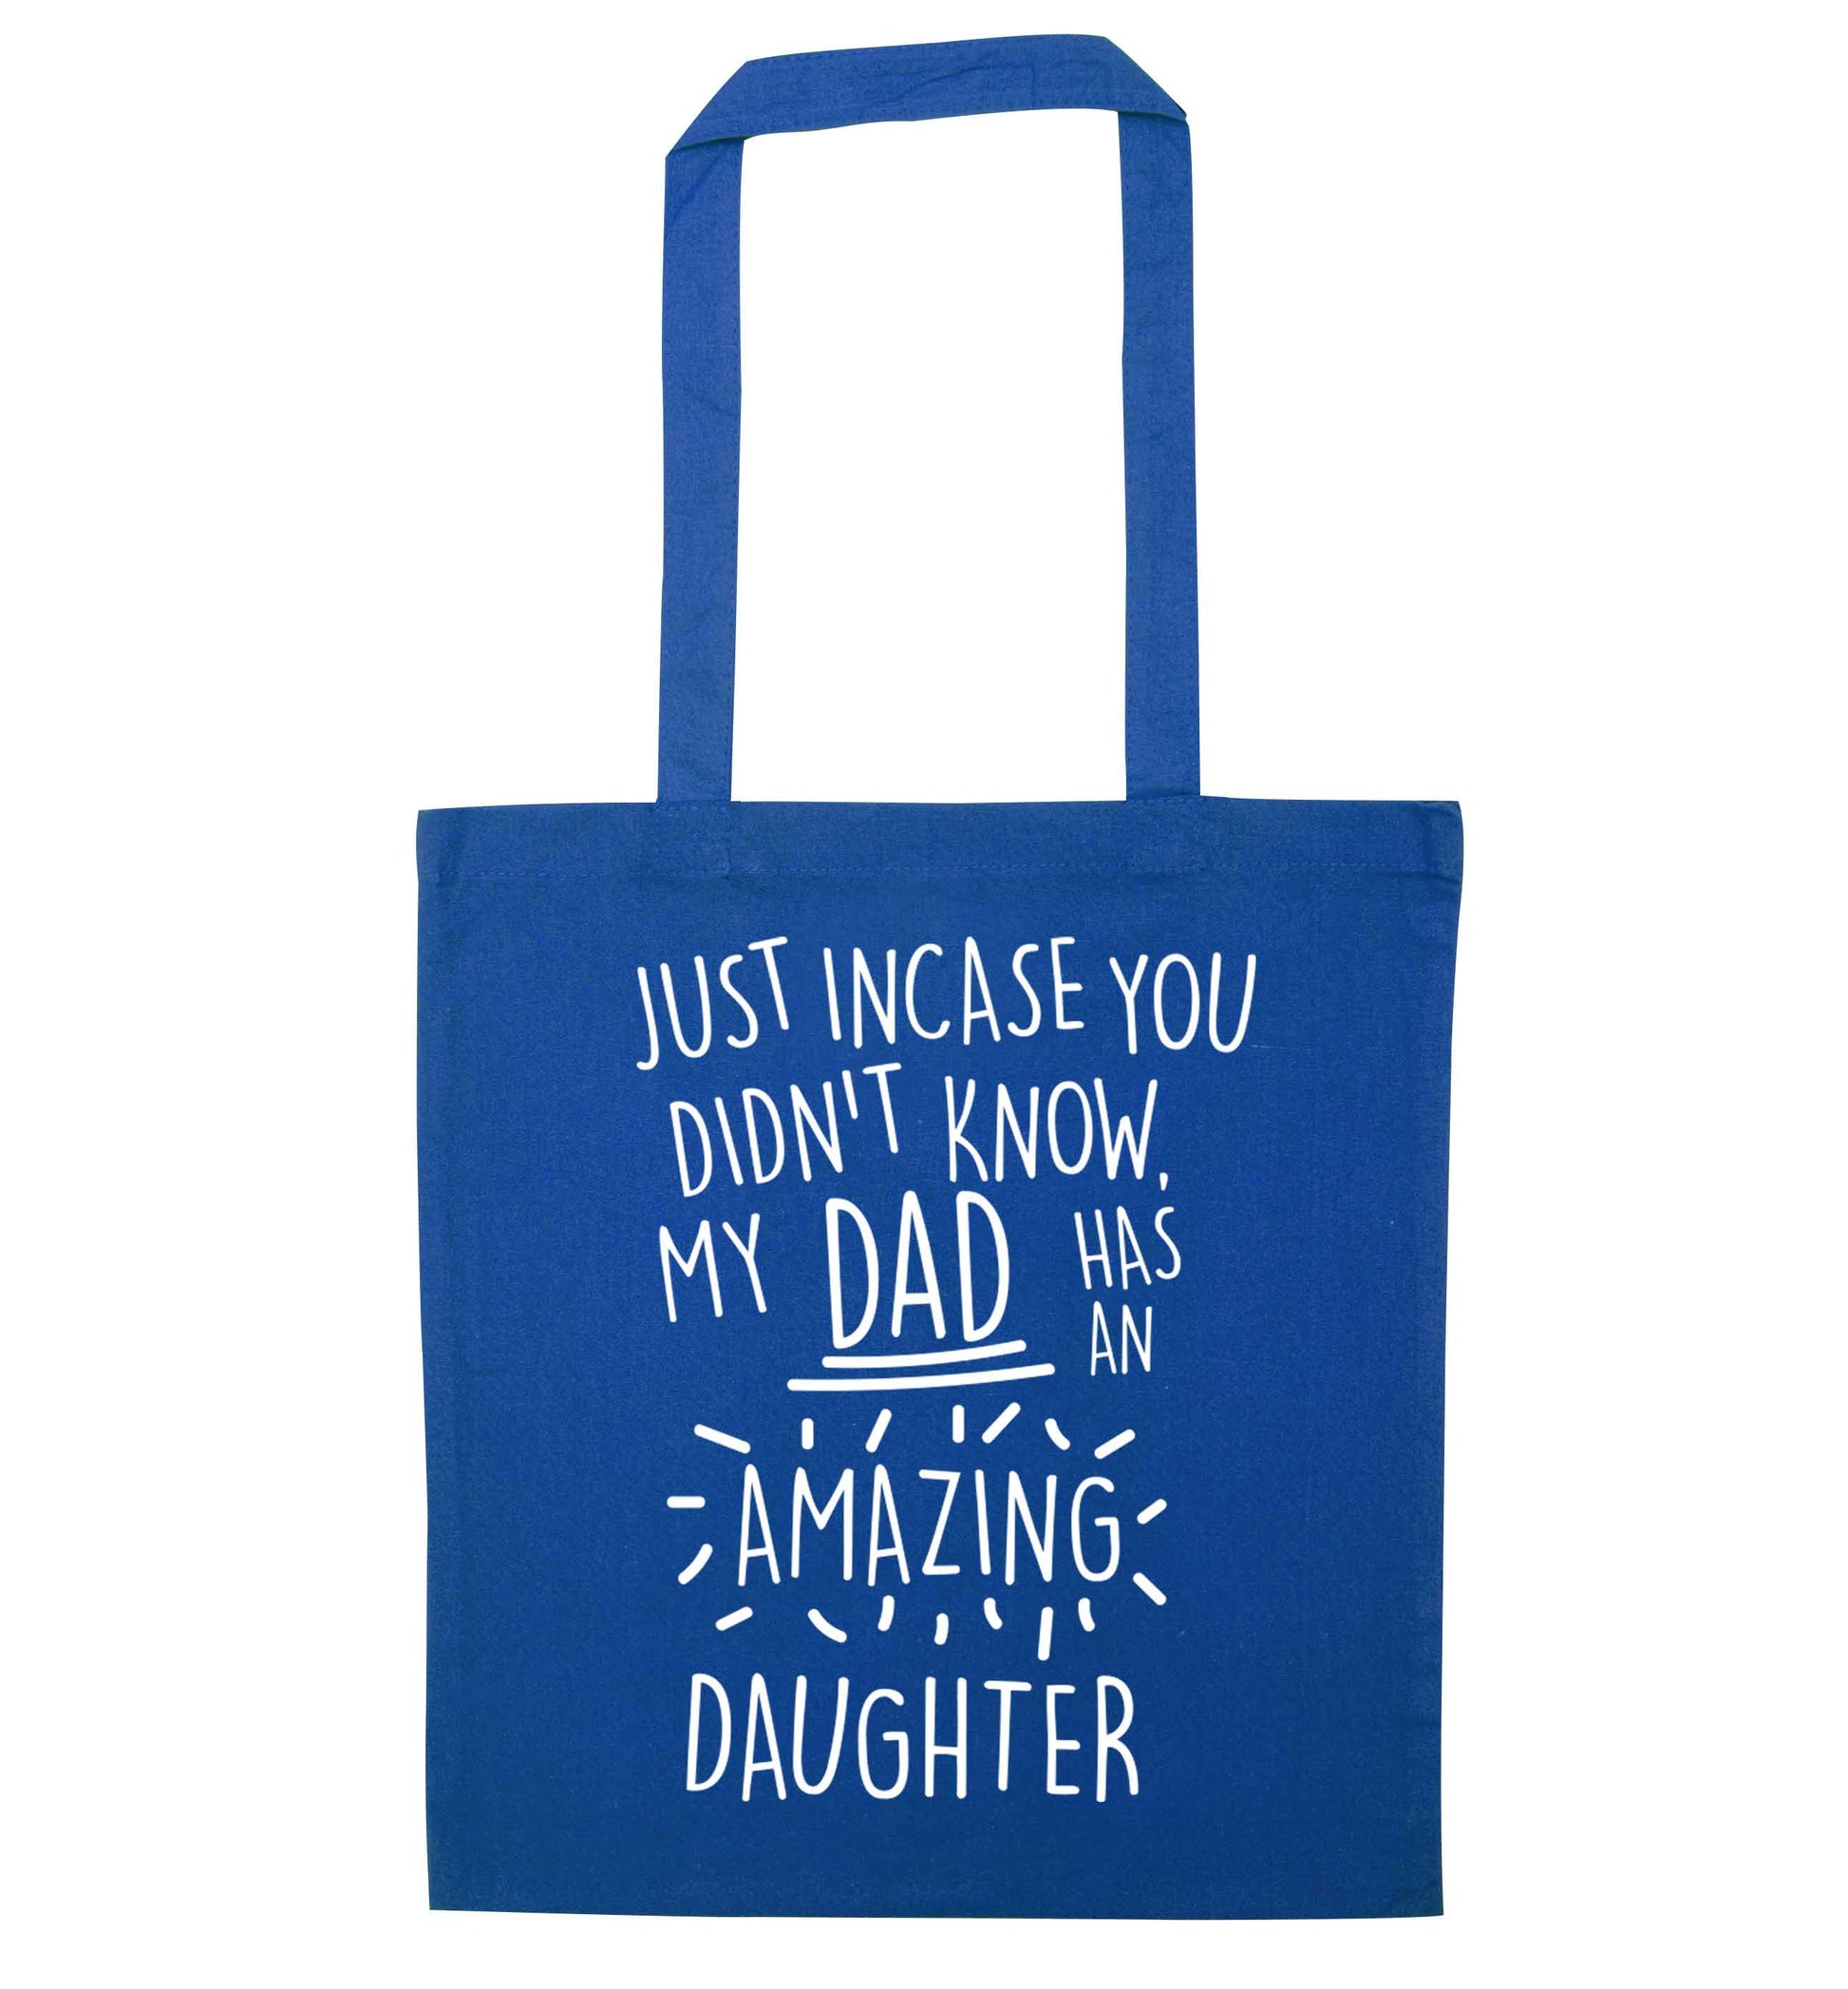 Just incase you didn't know my dad has an amazing daughter blue tote bag